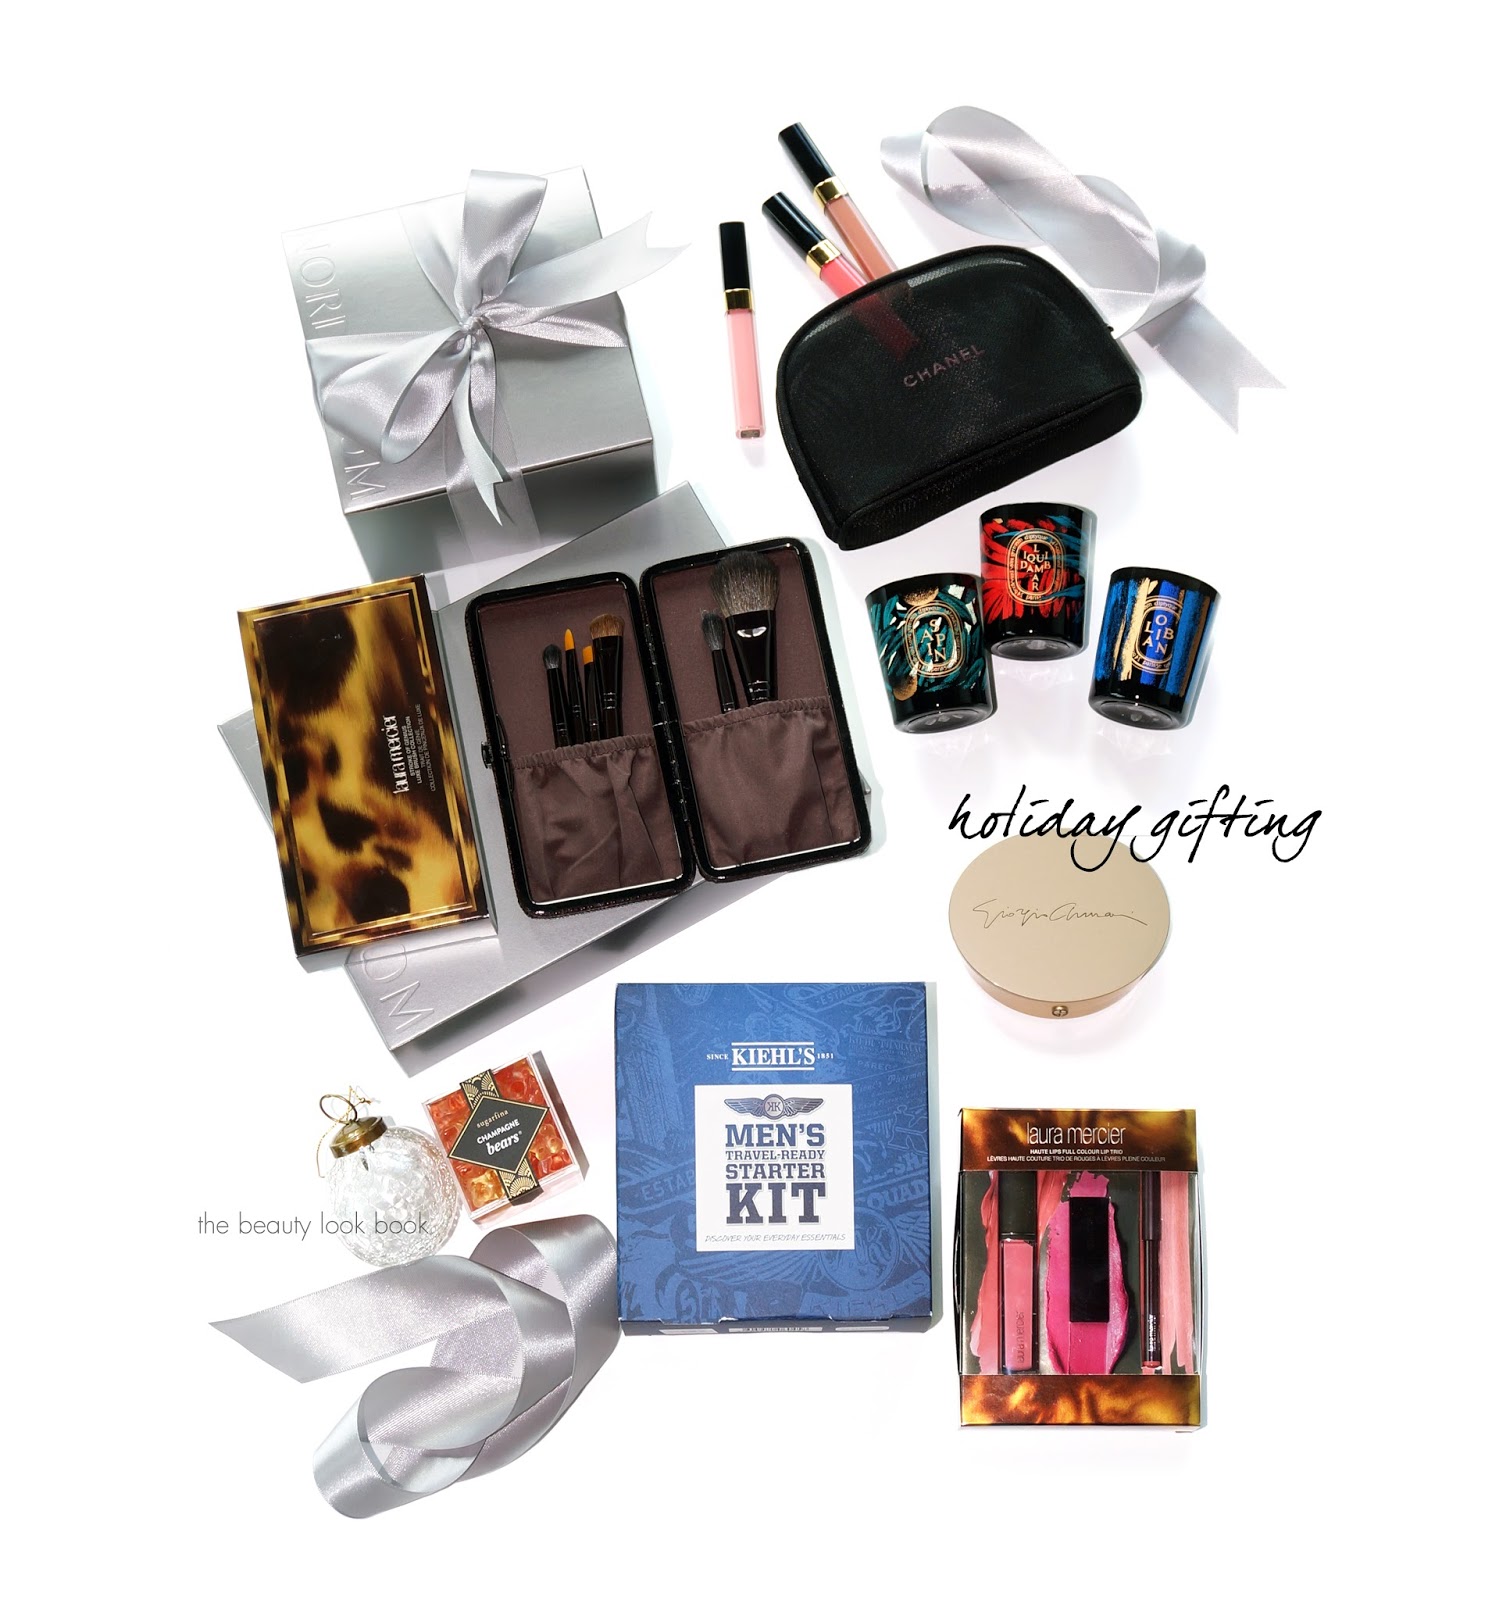 Holiday Beauty and Grooming Gifts from Nordstrom - The Beauty Look